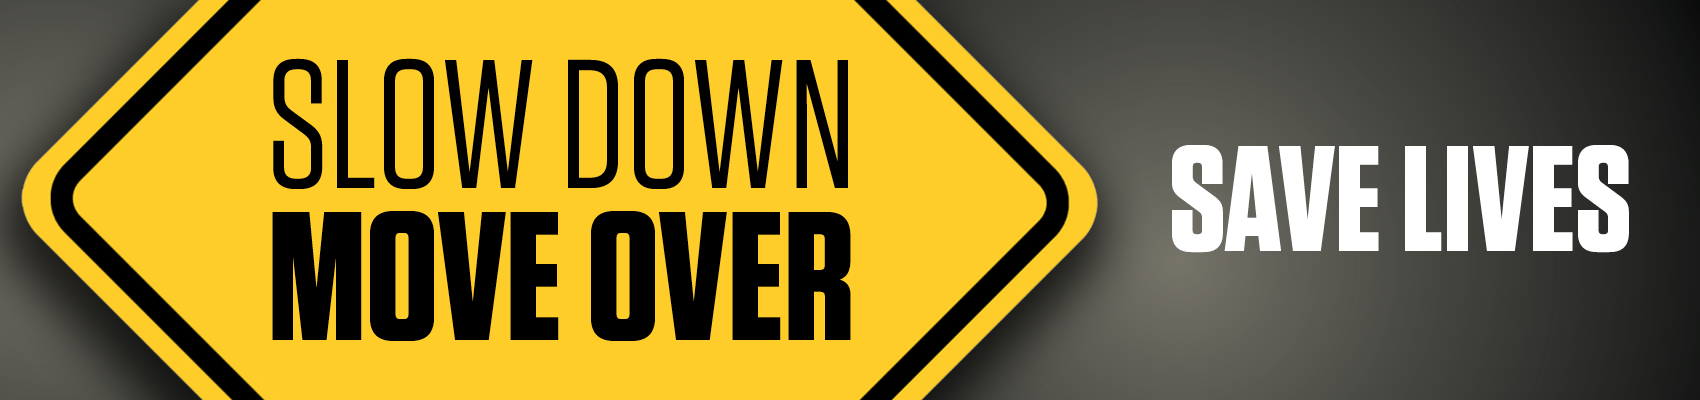 Slow Down Move Over Sign. Save Lives.